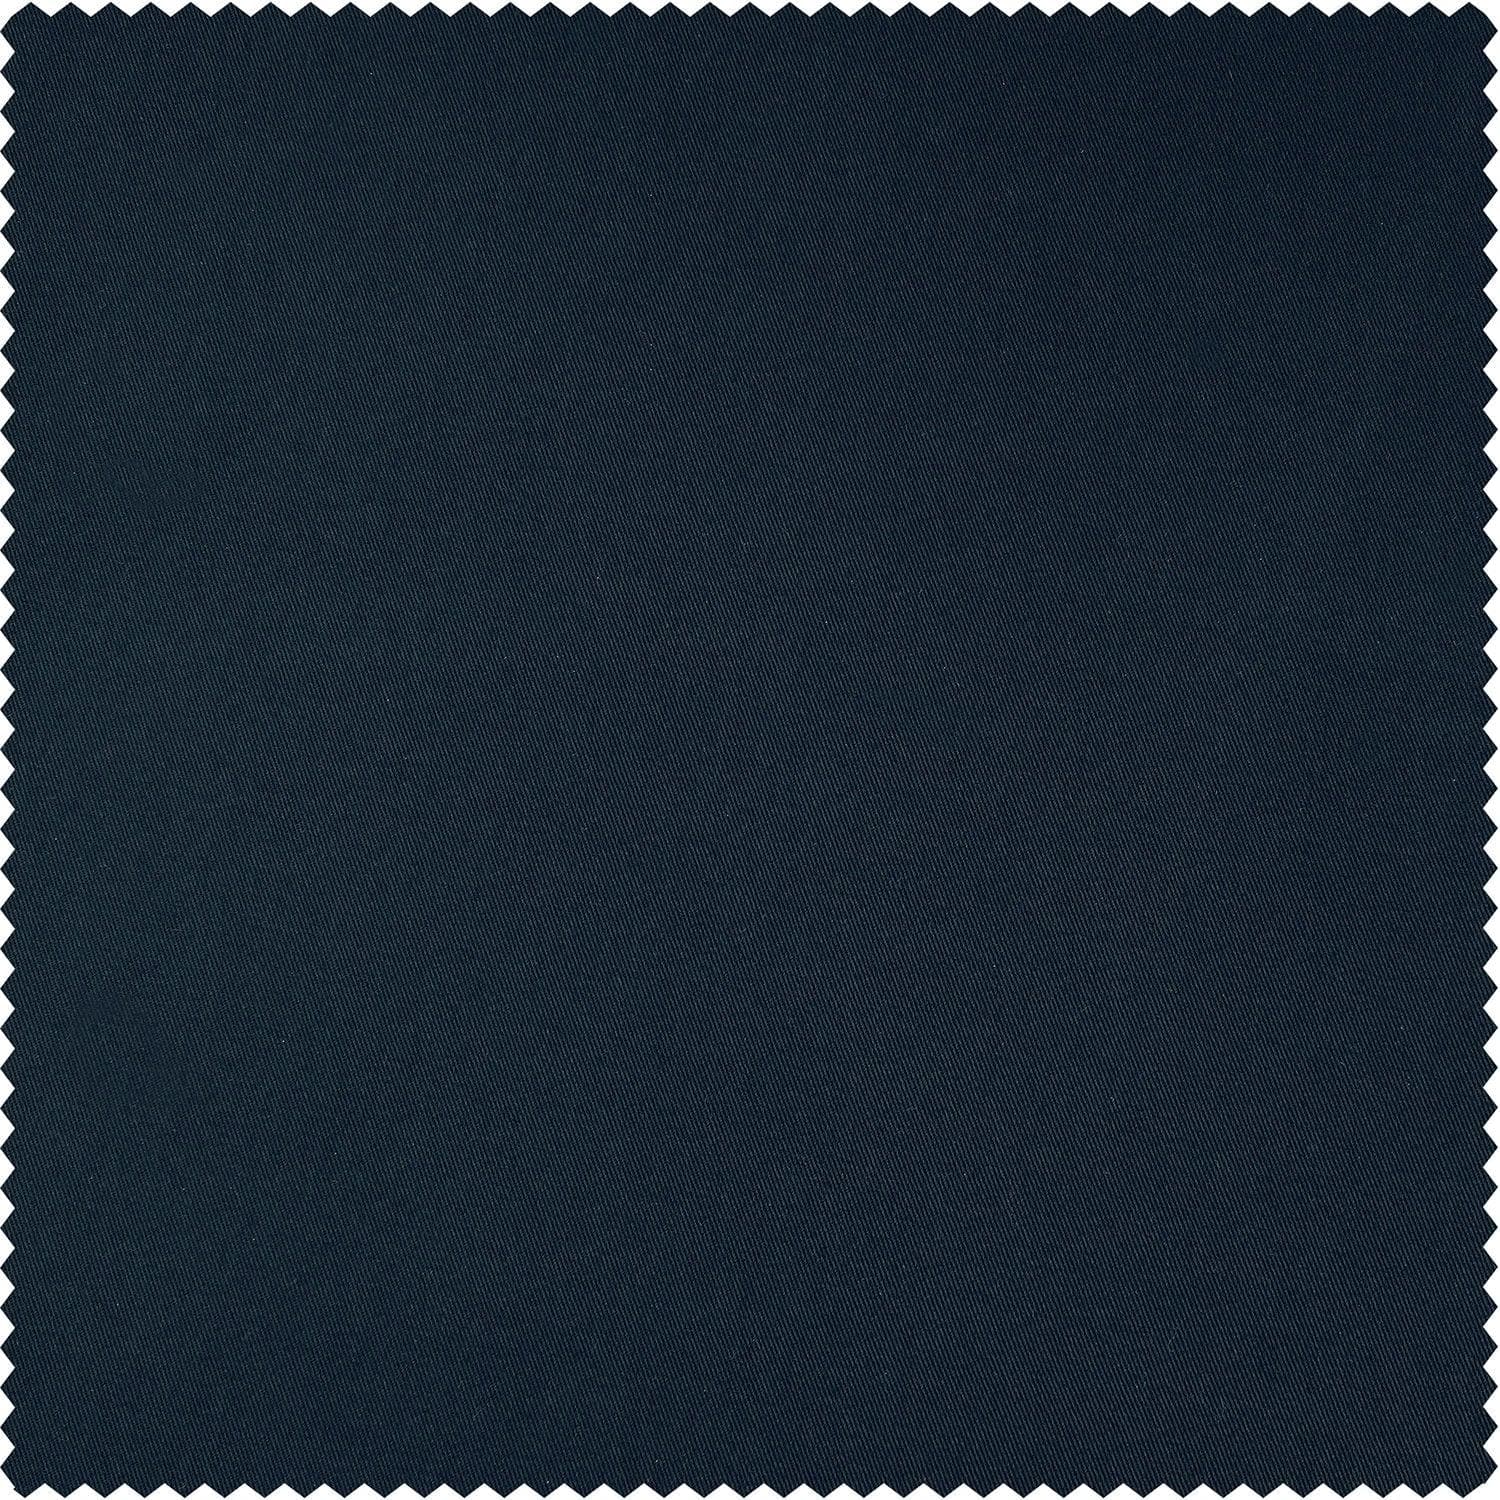 Polo Navy Solid Cotton Hotel Blackout Curtain